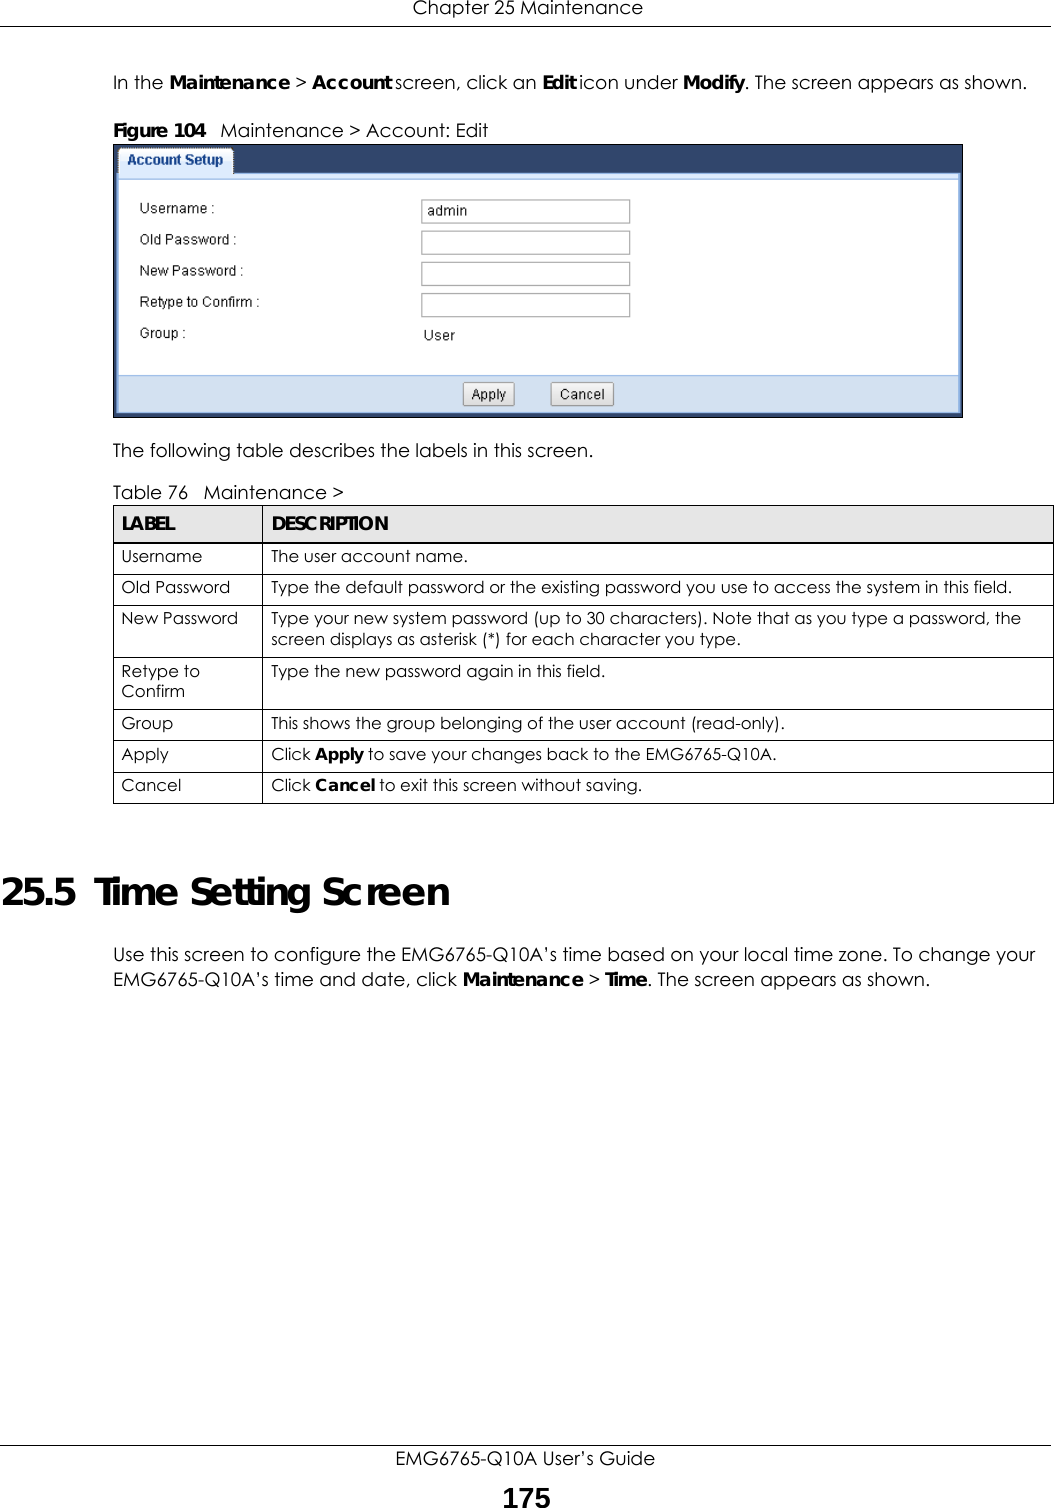  Chapter 25 MaintenanceEMG6765-Q10A User’s Guide175In the Maintenance &gt; Account screen, click an Edit icon under Modify. The screen appears as shown.Figure 104   Maintenance &gt; Account: Edit  The following table describes the labels in this screen.25.5  Time Setting ScreenUse this screen to configure the EMG6765-Q10A’s time based on your local time zone. To change your EMG6765-Q10A’s time and date, click Maintenance &gt; Time. The screen appears as shown. Table 76   Maintenance &gt; LABEL DESCRIPTIONUsername The user account name.Old Password Type the default password or the existing password you use to access the system in this field.New Password Type your new system password (up to 30 characters). Note that as you type a password, the screen displays as asterisk (*) for each character you type.Retype to ConfirmType the new password again in this field.Group This shows the group belonging of the user account (read-only).Apply Click Apply to save your changes back to the EMG6765-Q10A.Cancel Click Cancel to exit this screen without saving.